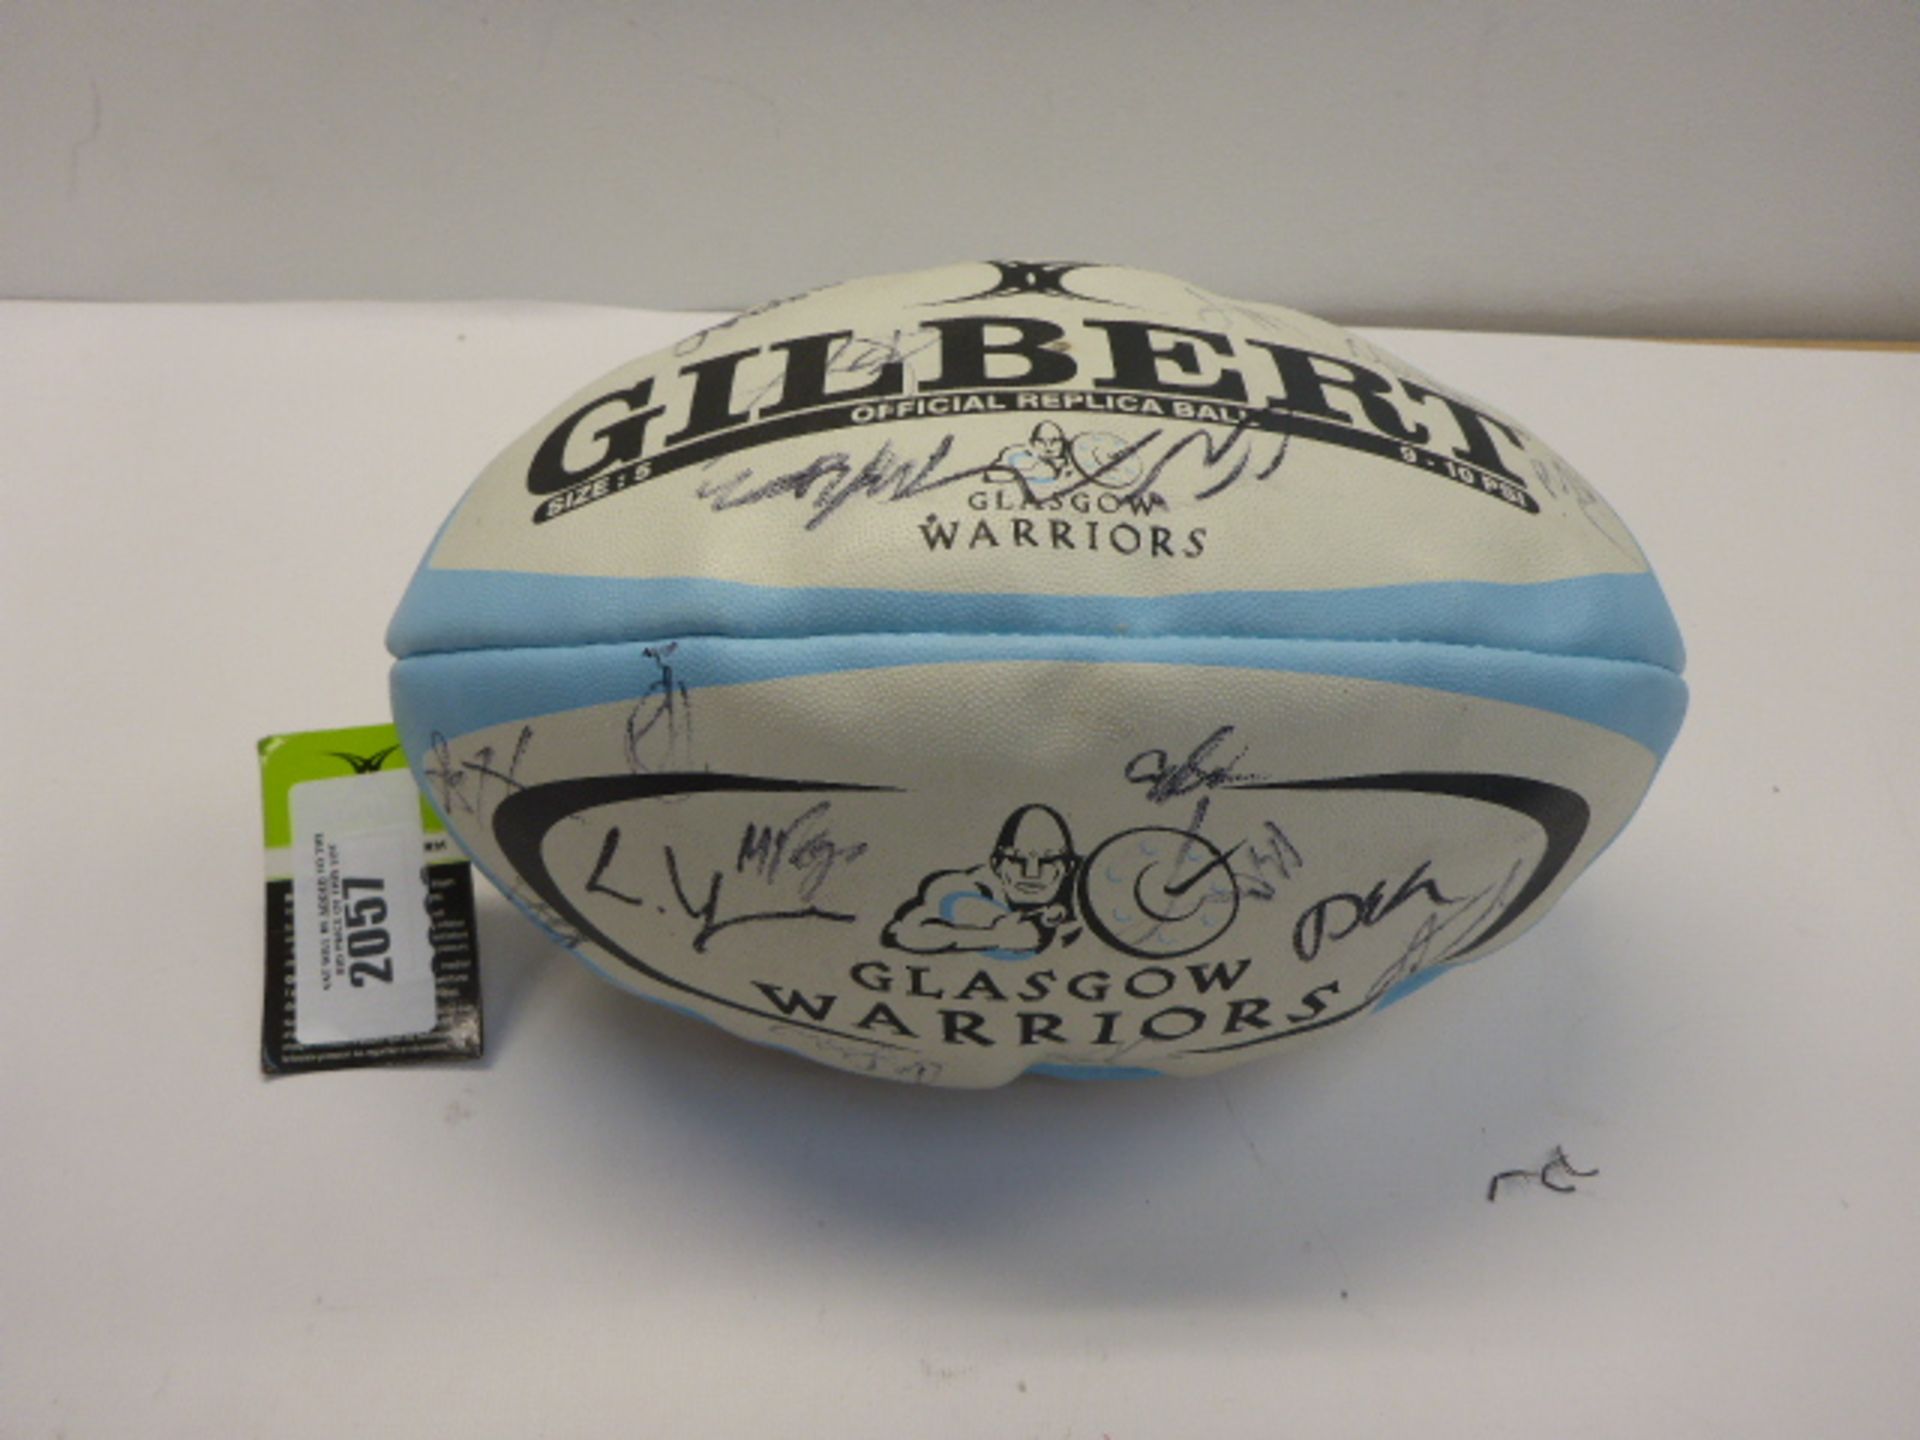 Gilbert Official replica Glasgow warriors rugby ball. Baring signatures Unverified.